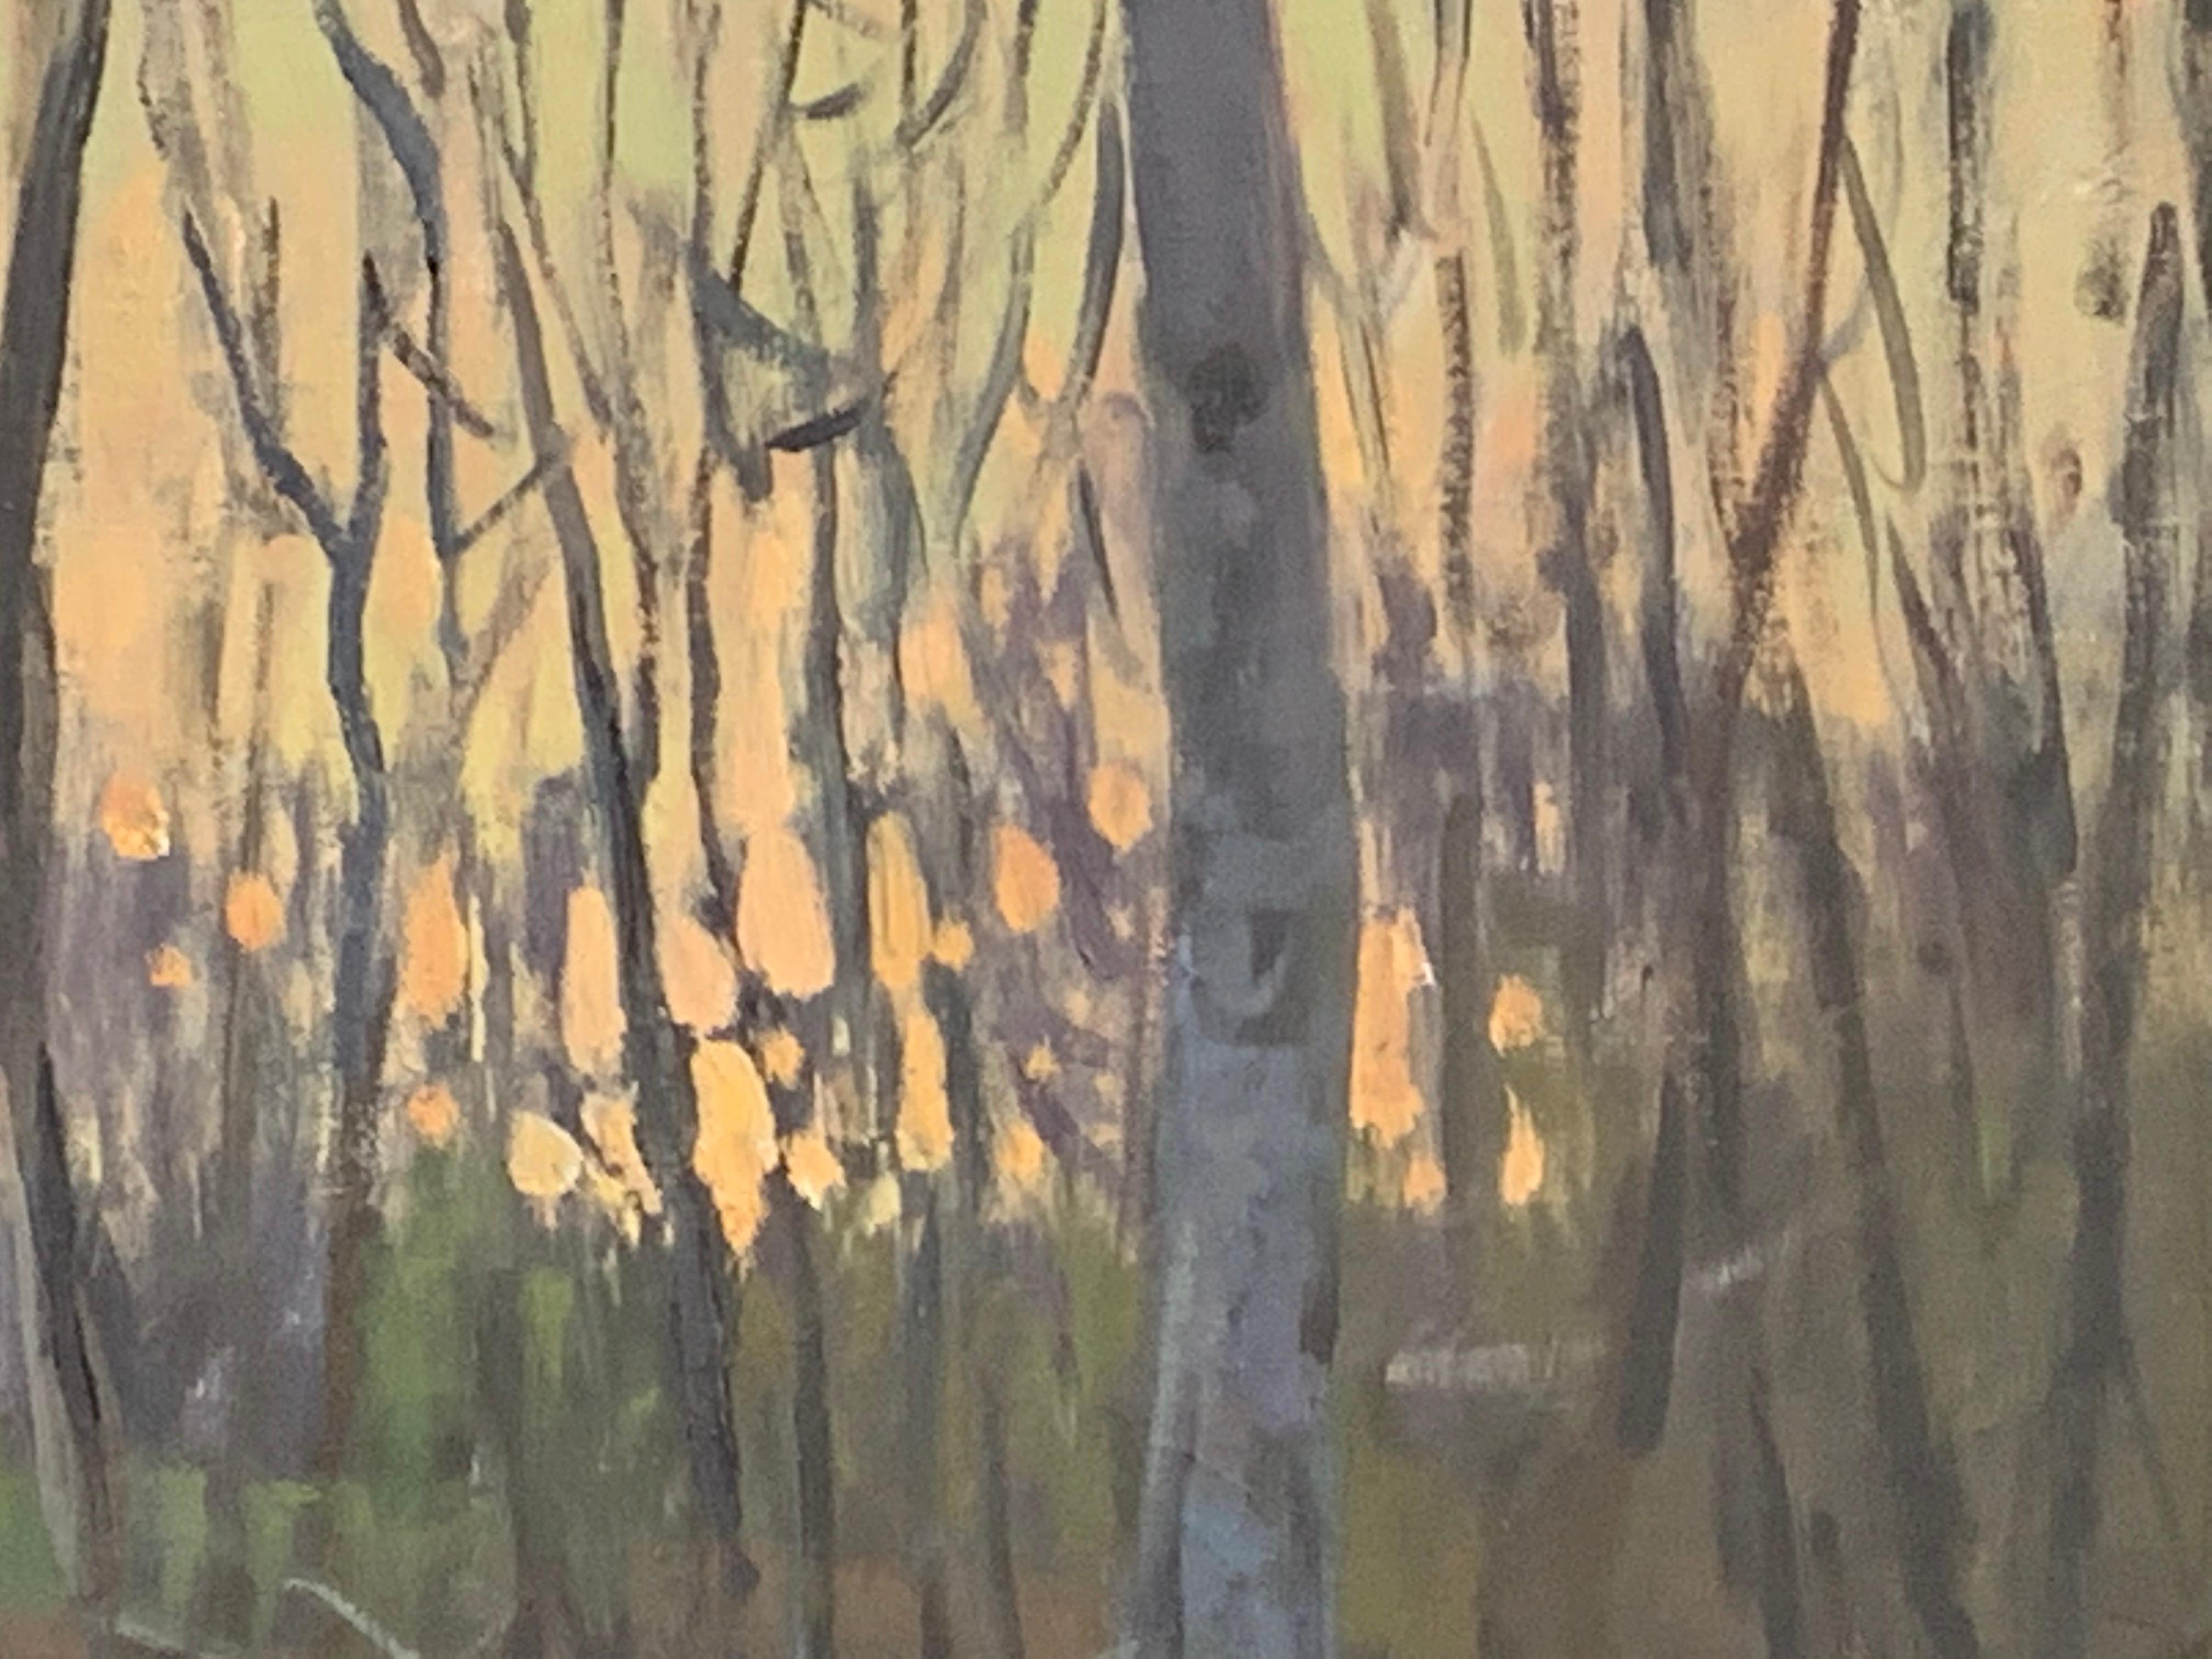 Painted en plein air in Shelter Island, New York. Barren spring birch-trees post up out of marshlands, a pond in the woods. The setting sun casts an orange glow from the horizon to above, and reflects on the ponds surface.

Framed dimensions: 29 x